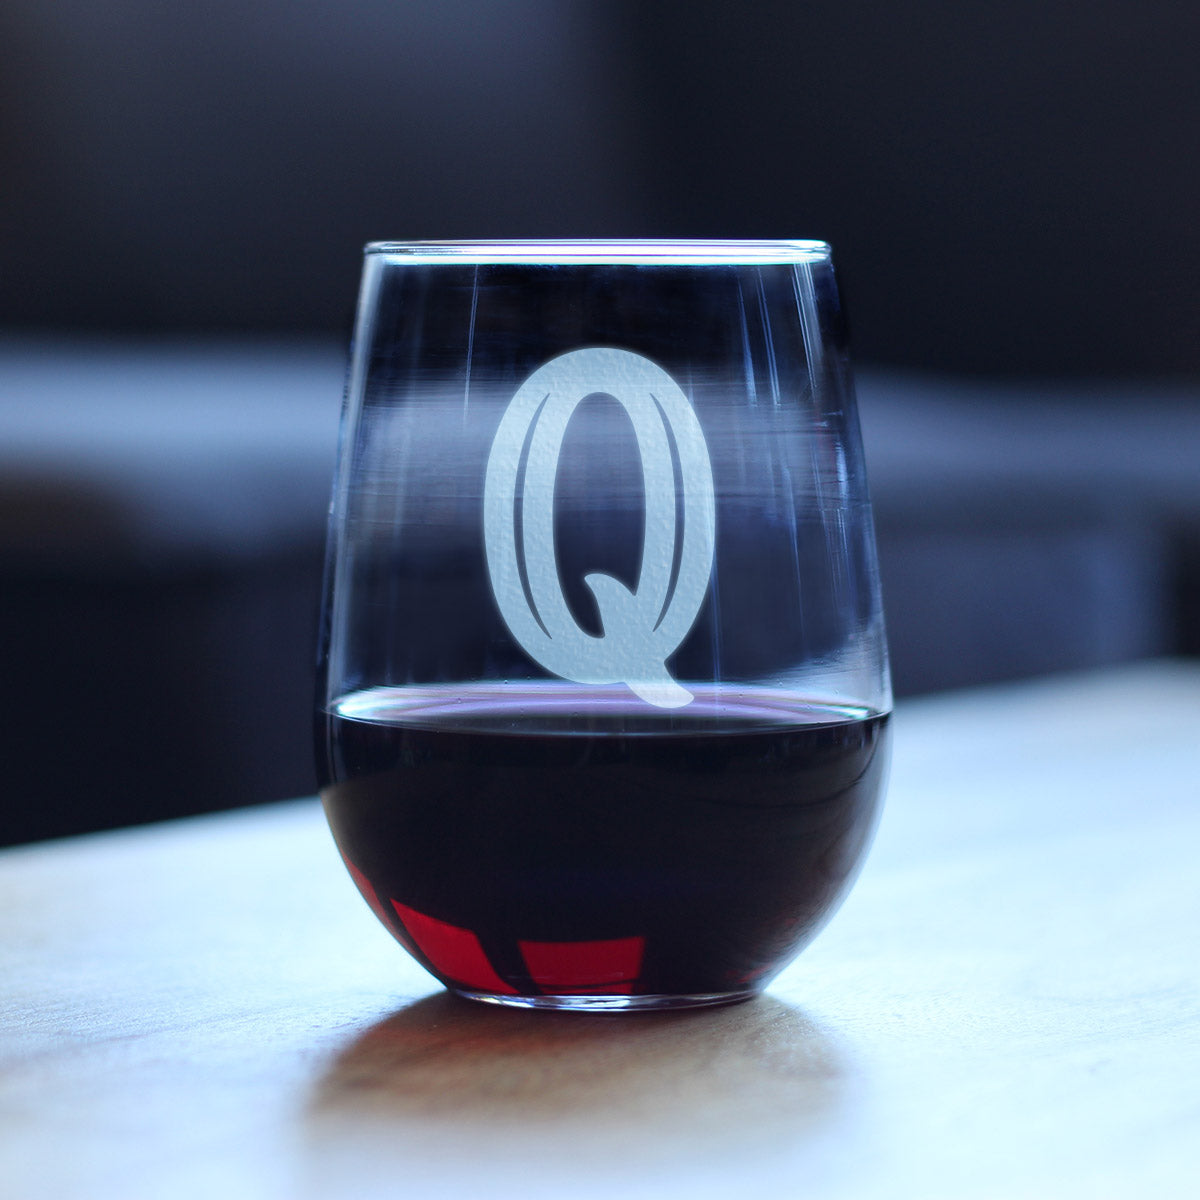 Monogram Bold Letter Q - Stemless Wine Glass - Personalized Gifts for Women and Men - Large Engraved Glasses